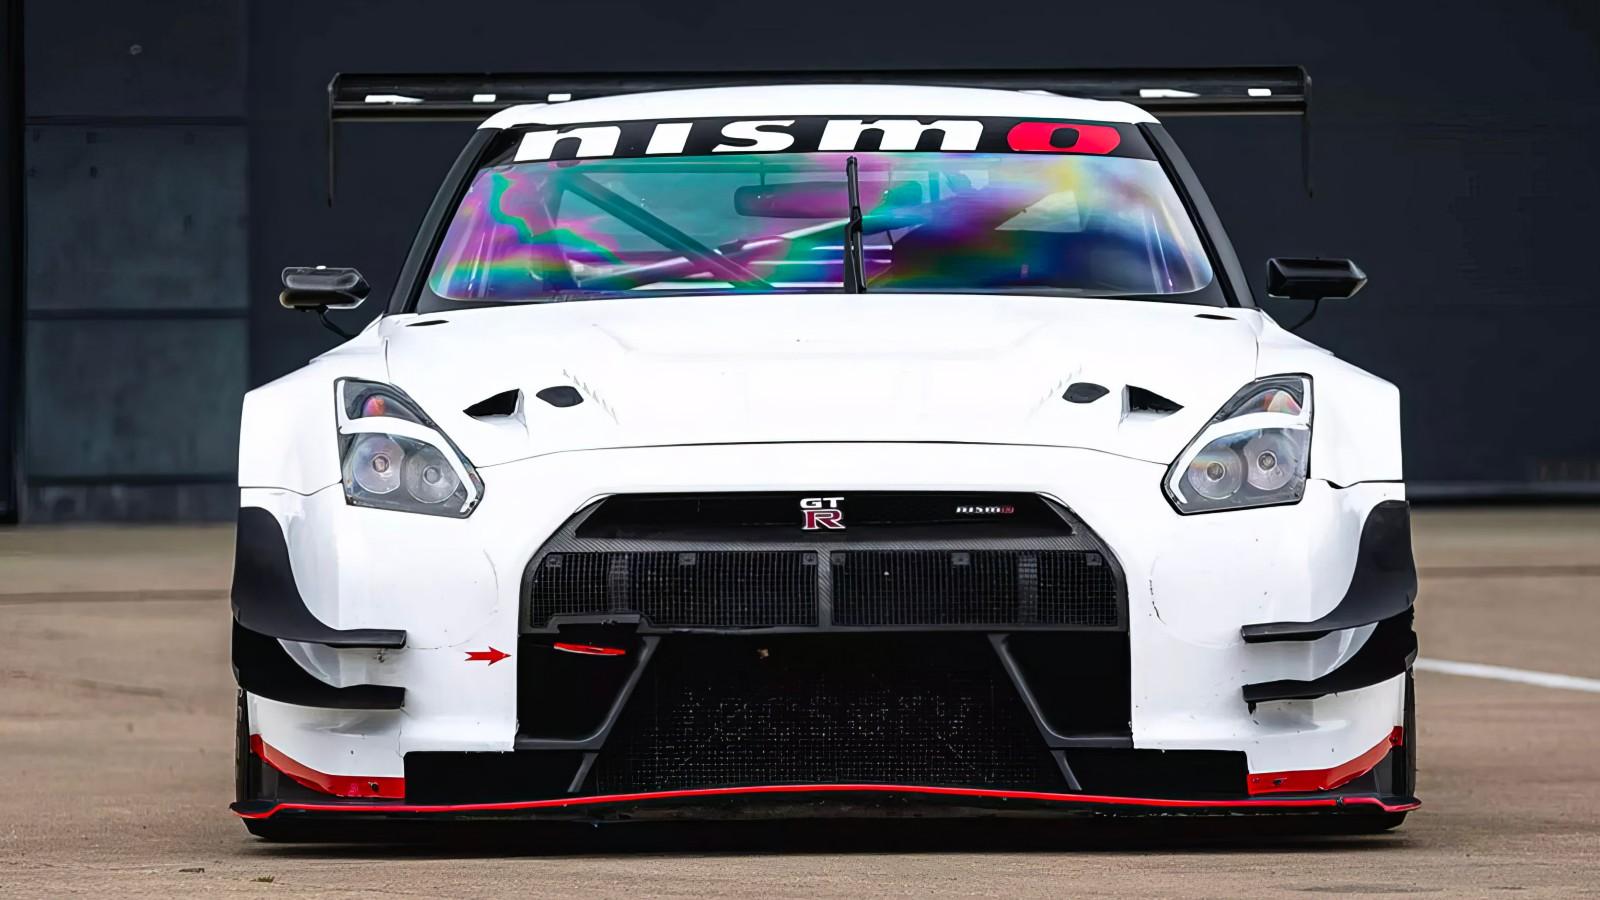 The Nissan GT-R from Gran Turismo